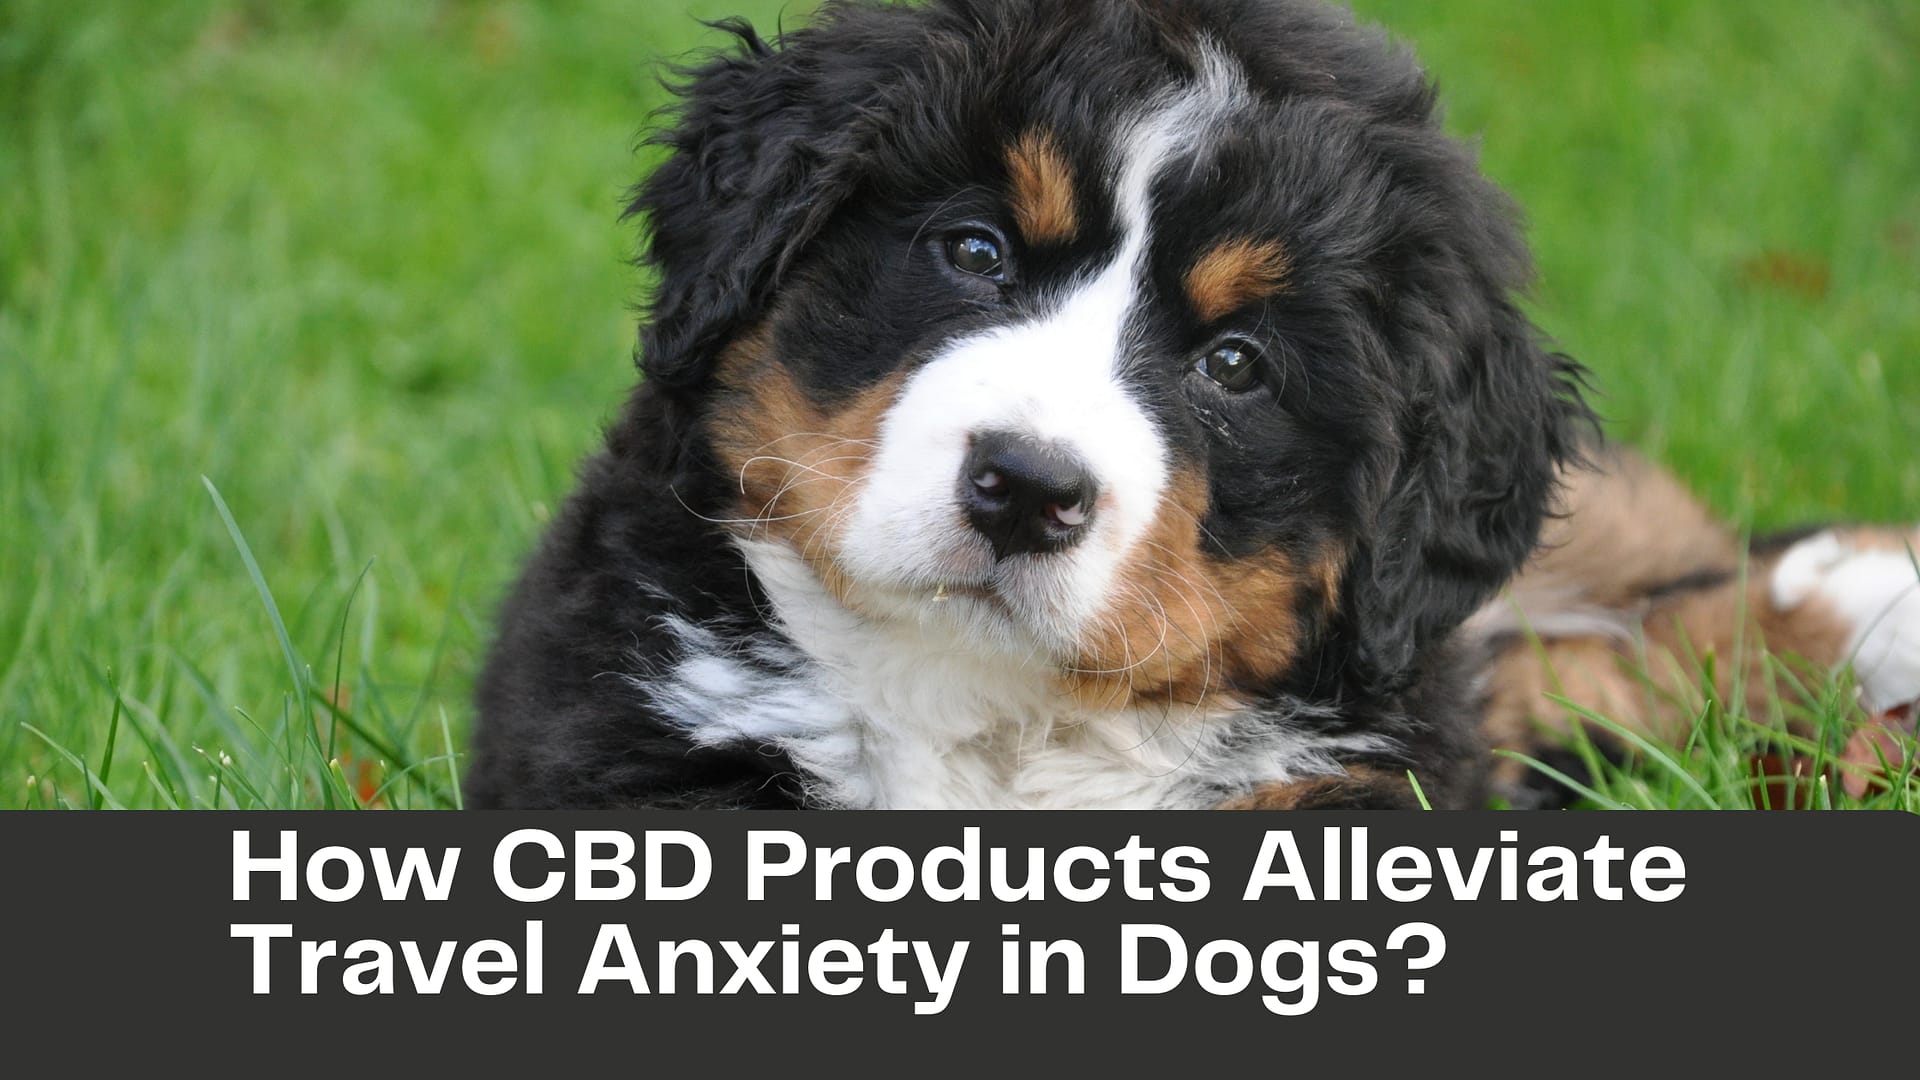 How CBD Products Alleviate Travel Anxiety in Dogs?